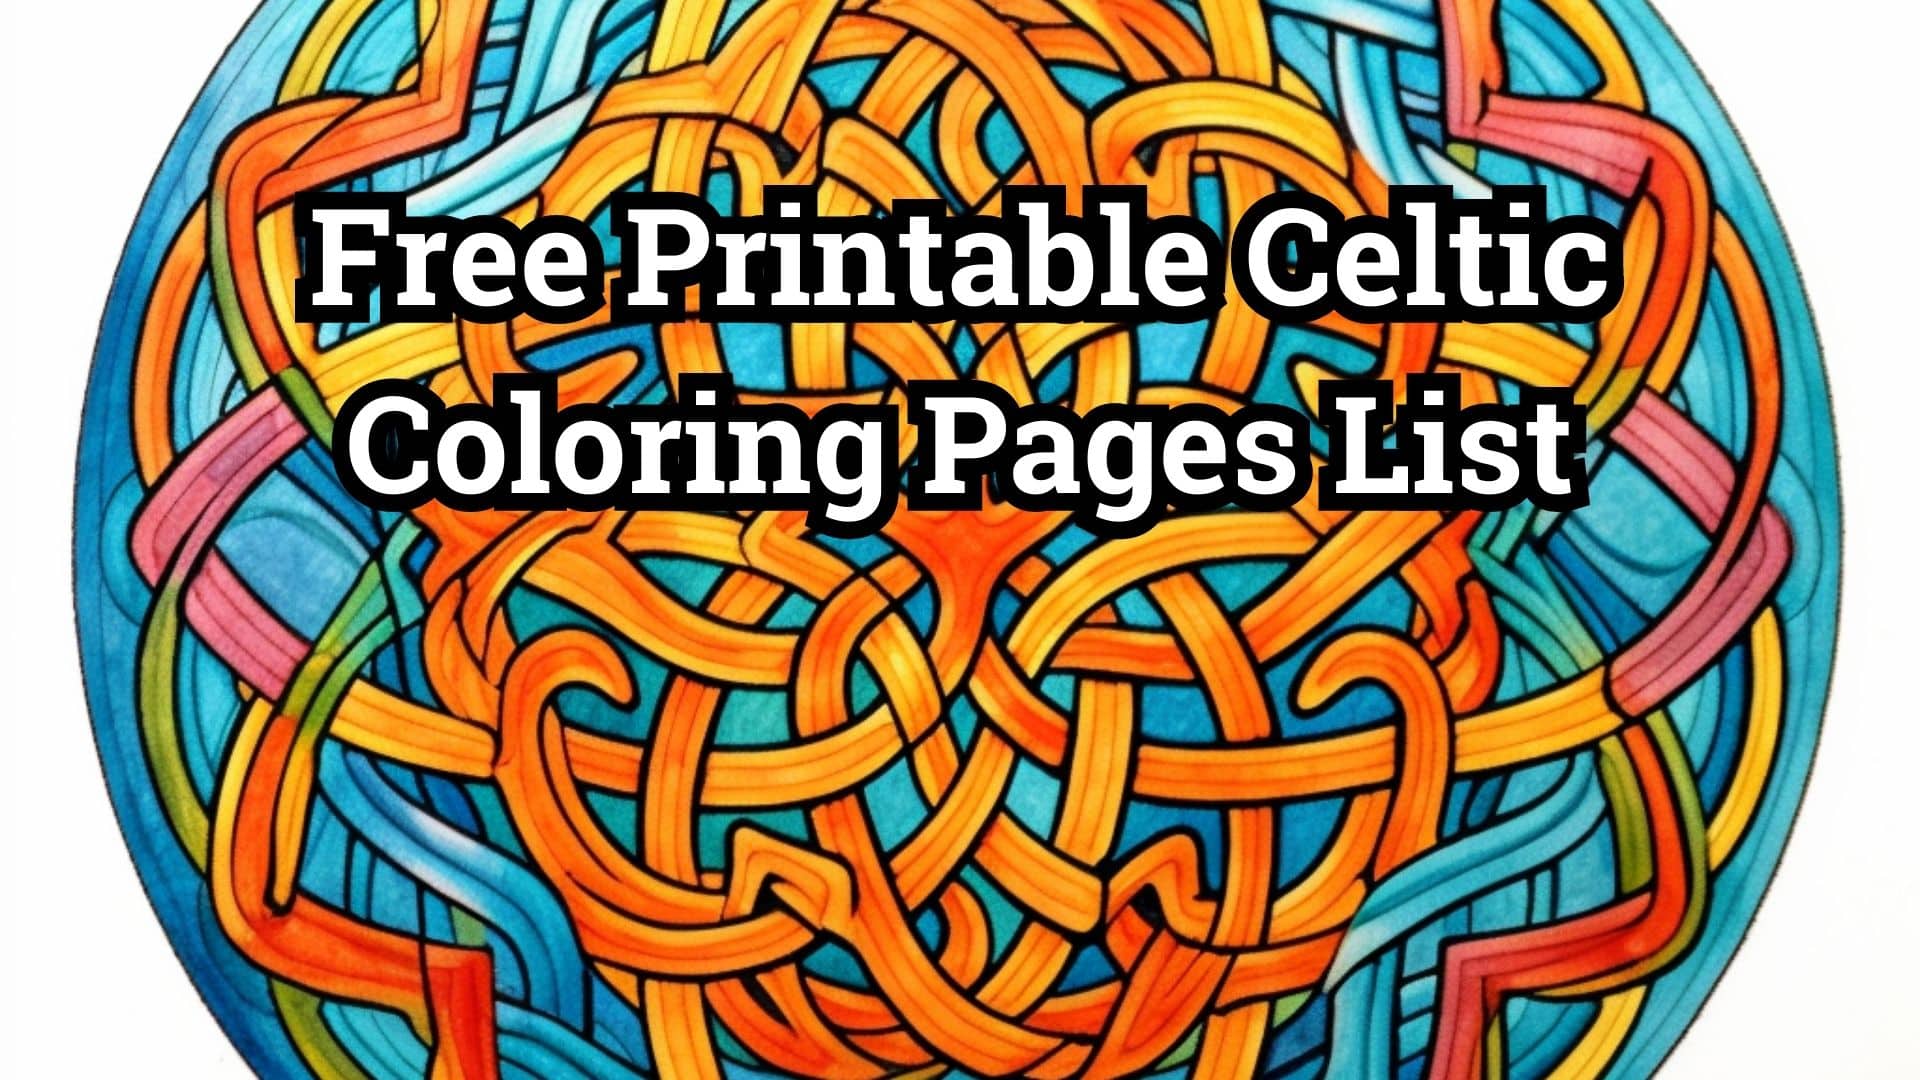 Free Printable Celtic Coloring Pages List